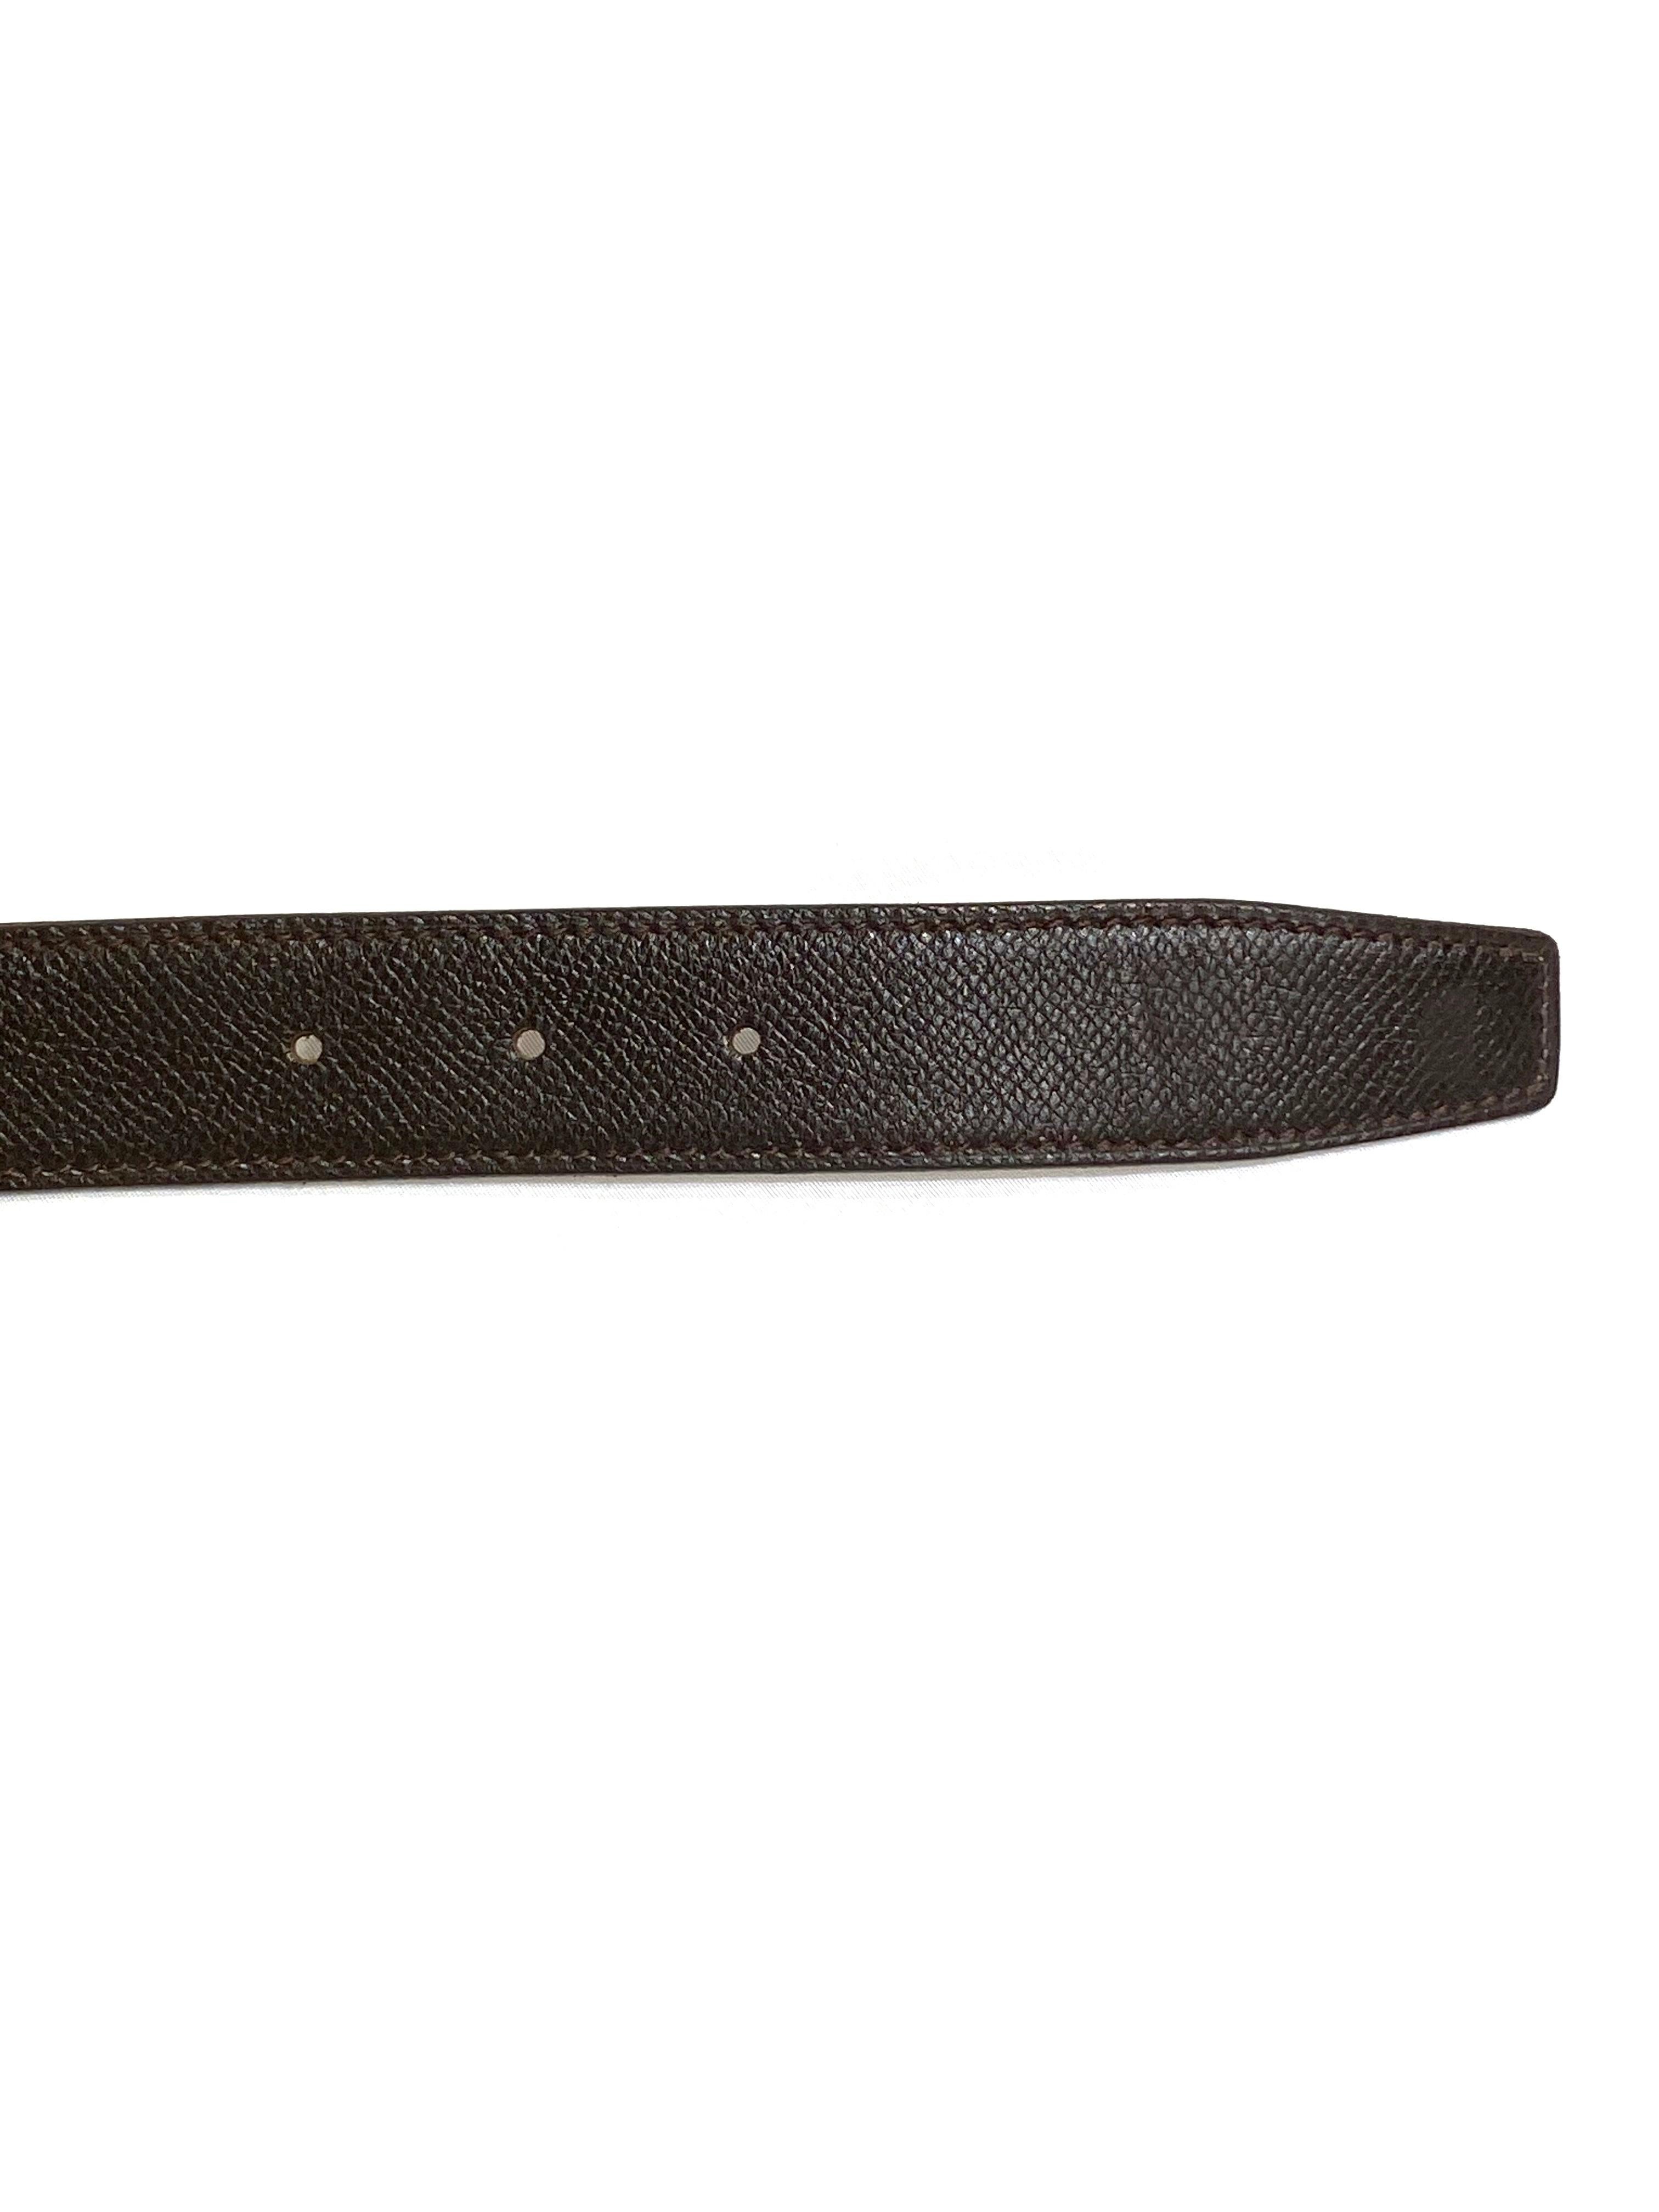 Product details:

Featuring brown calfskin lather strap belt, stamped Hermes Paris Made in France.